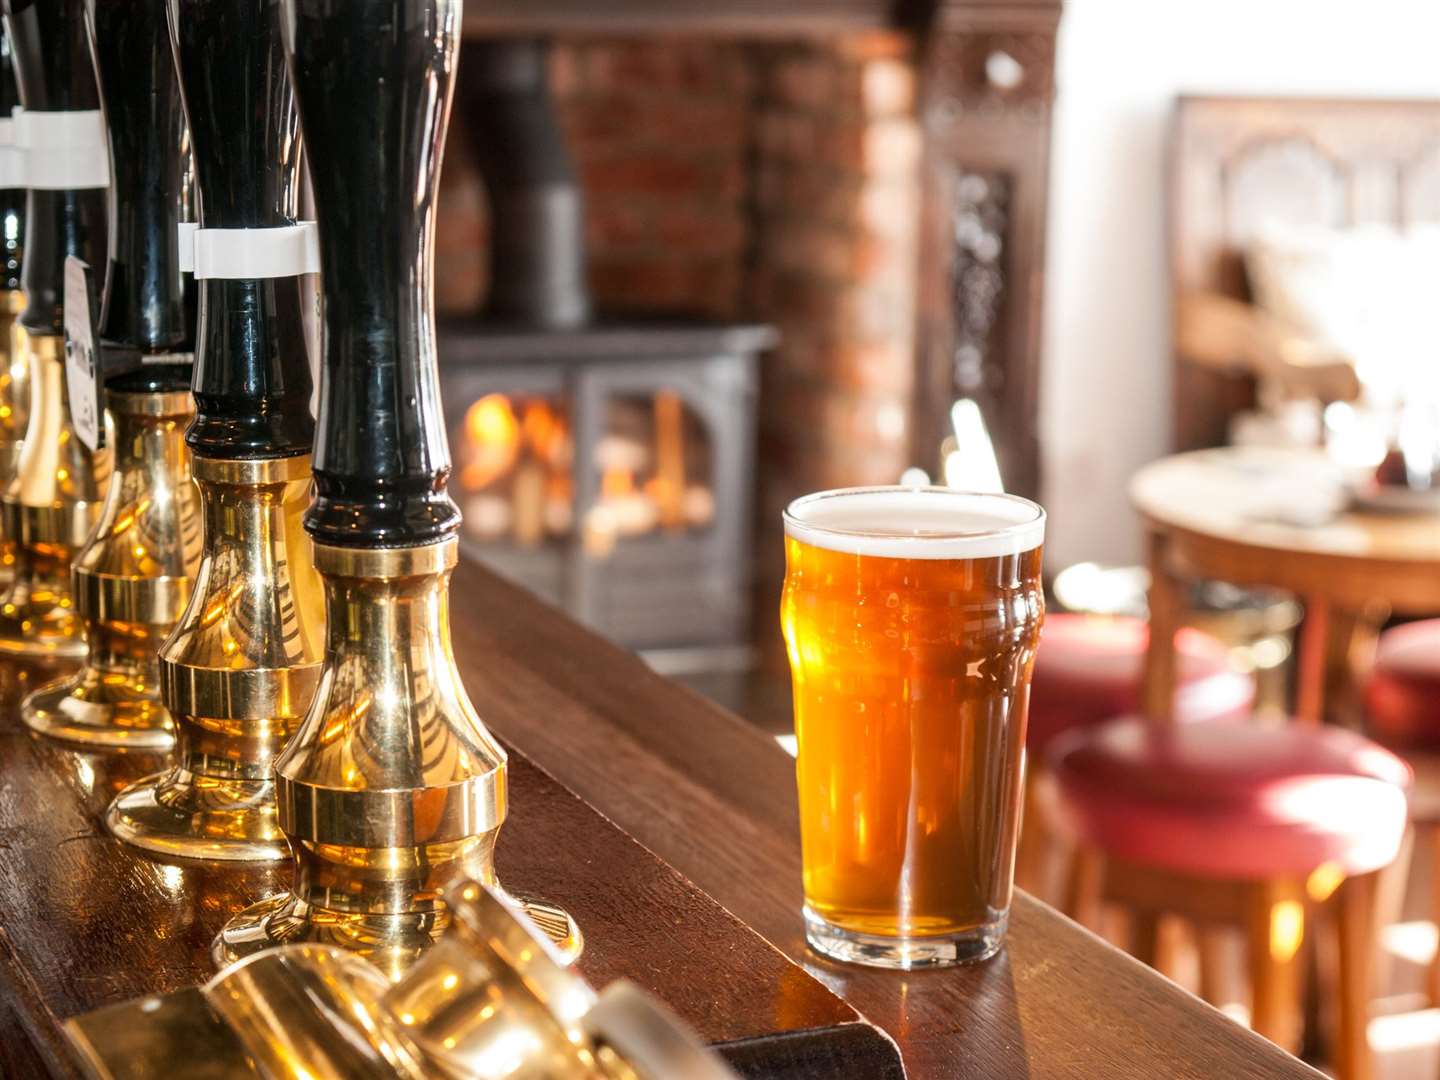 Get your pint and pull up a bar stool at the Stay Inn